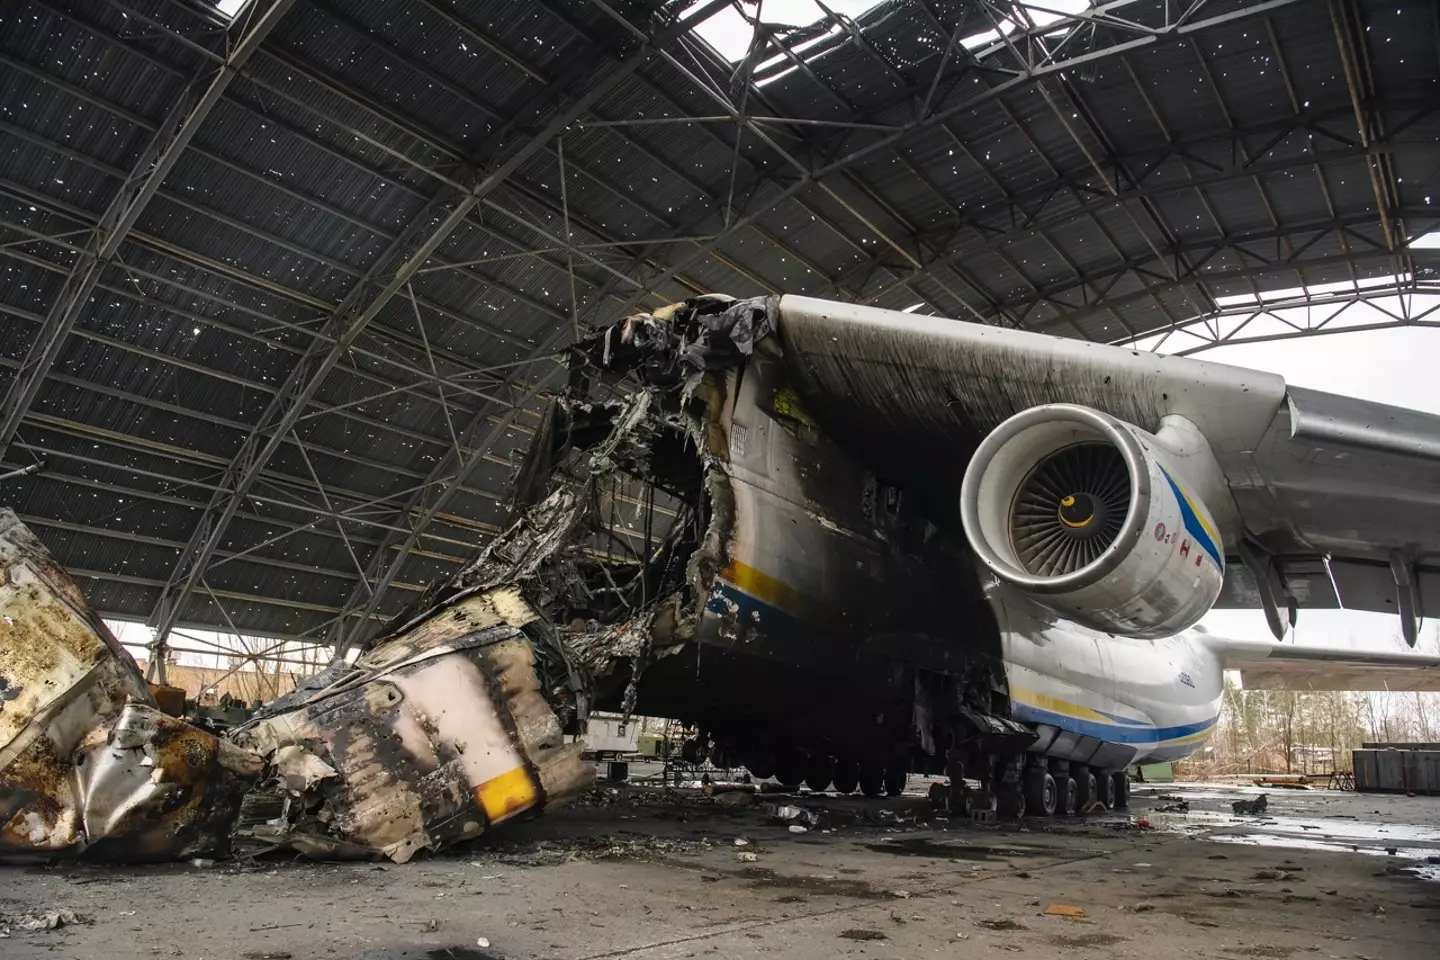 The wreckage of the world's largest cargo plane Antonov An-225.